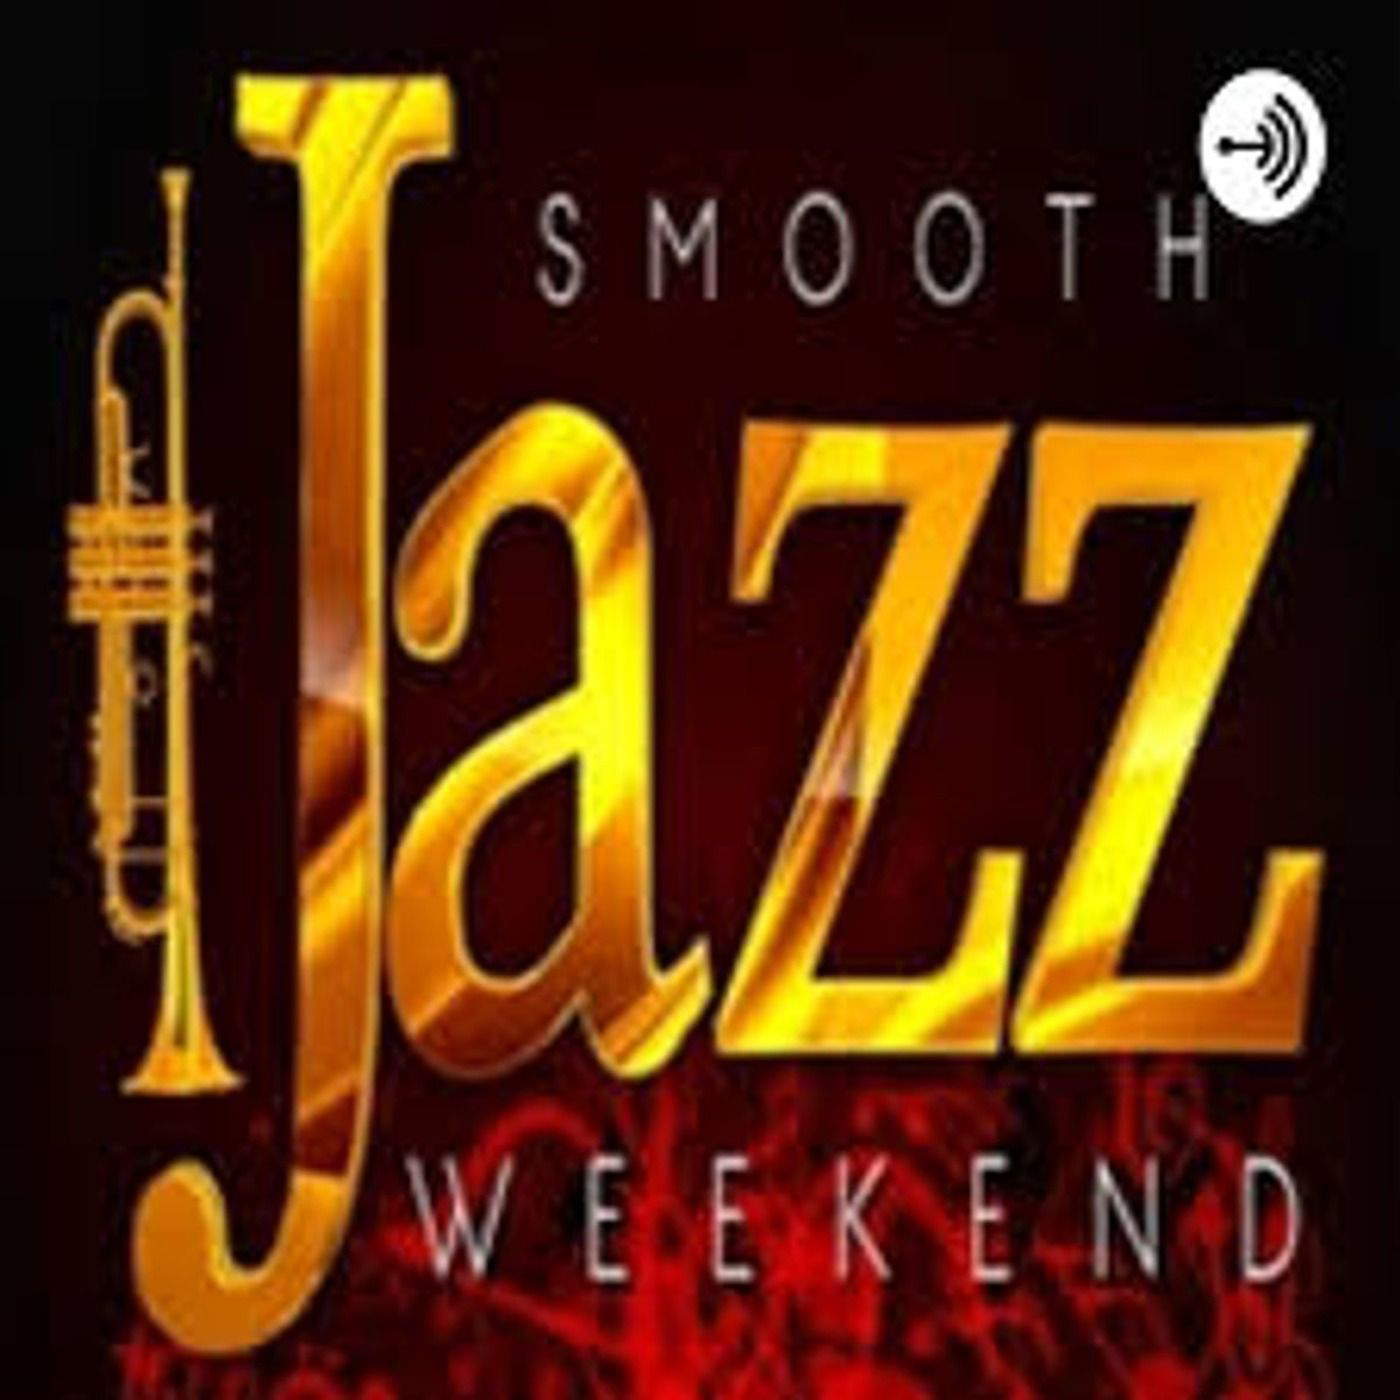 A highlight from Smooth Jazz Weekend with Tina E (It's Personal)